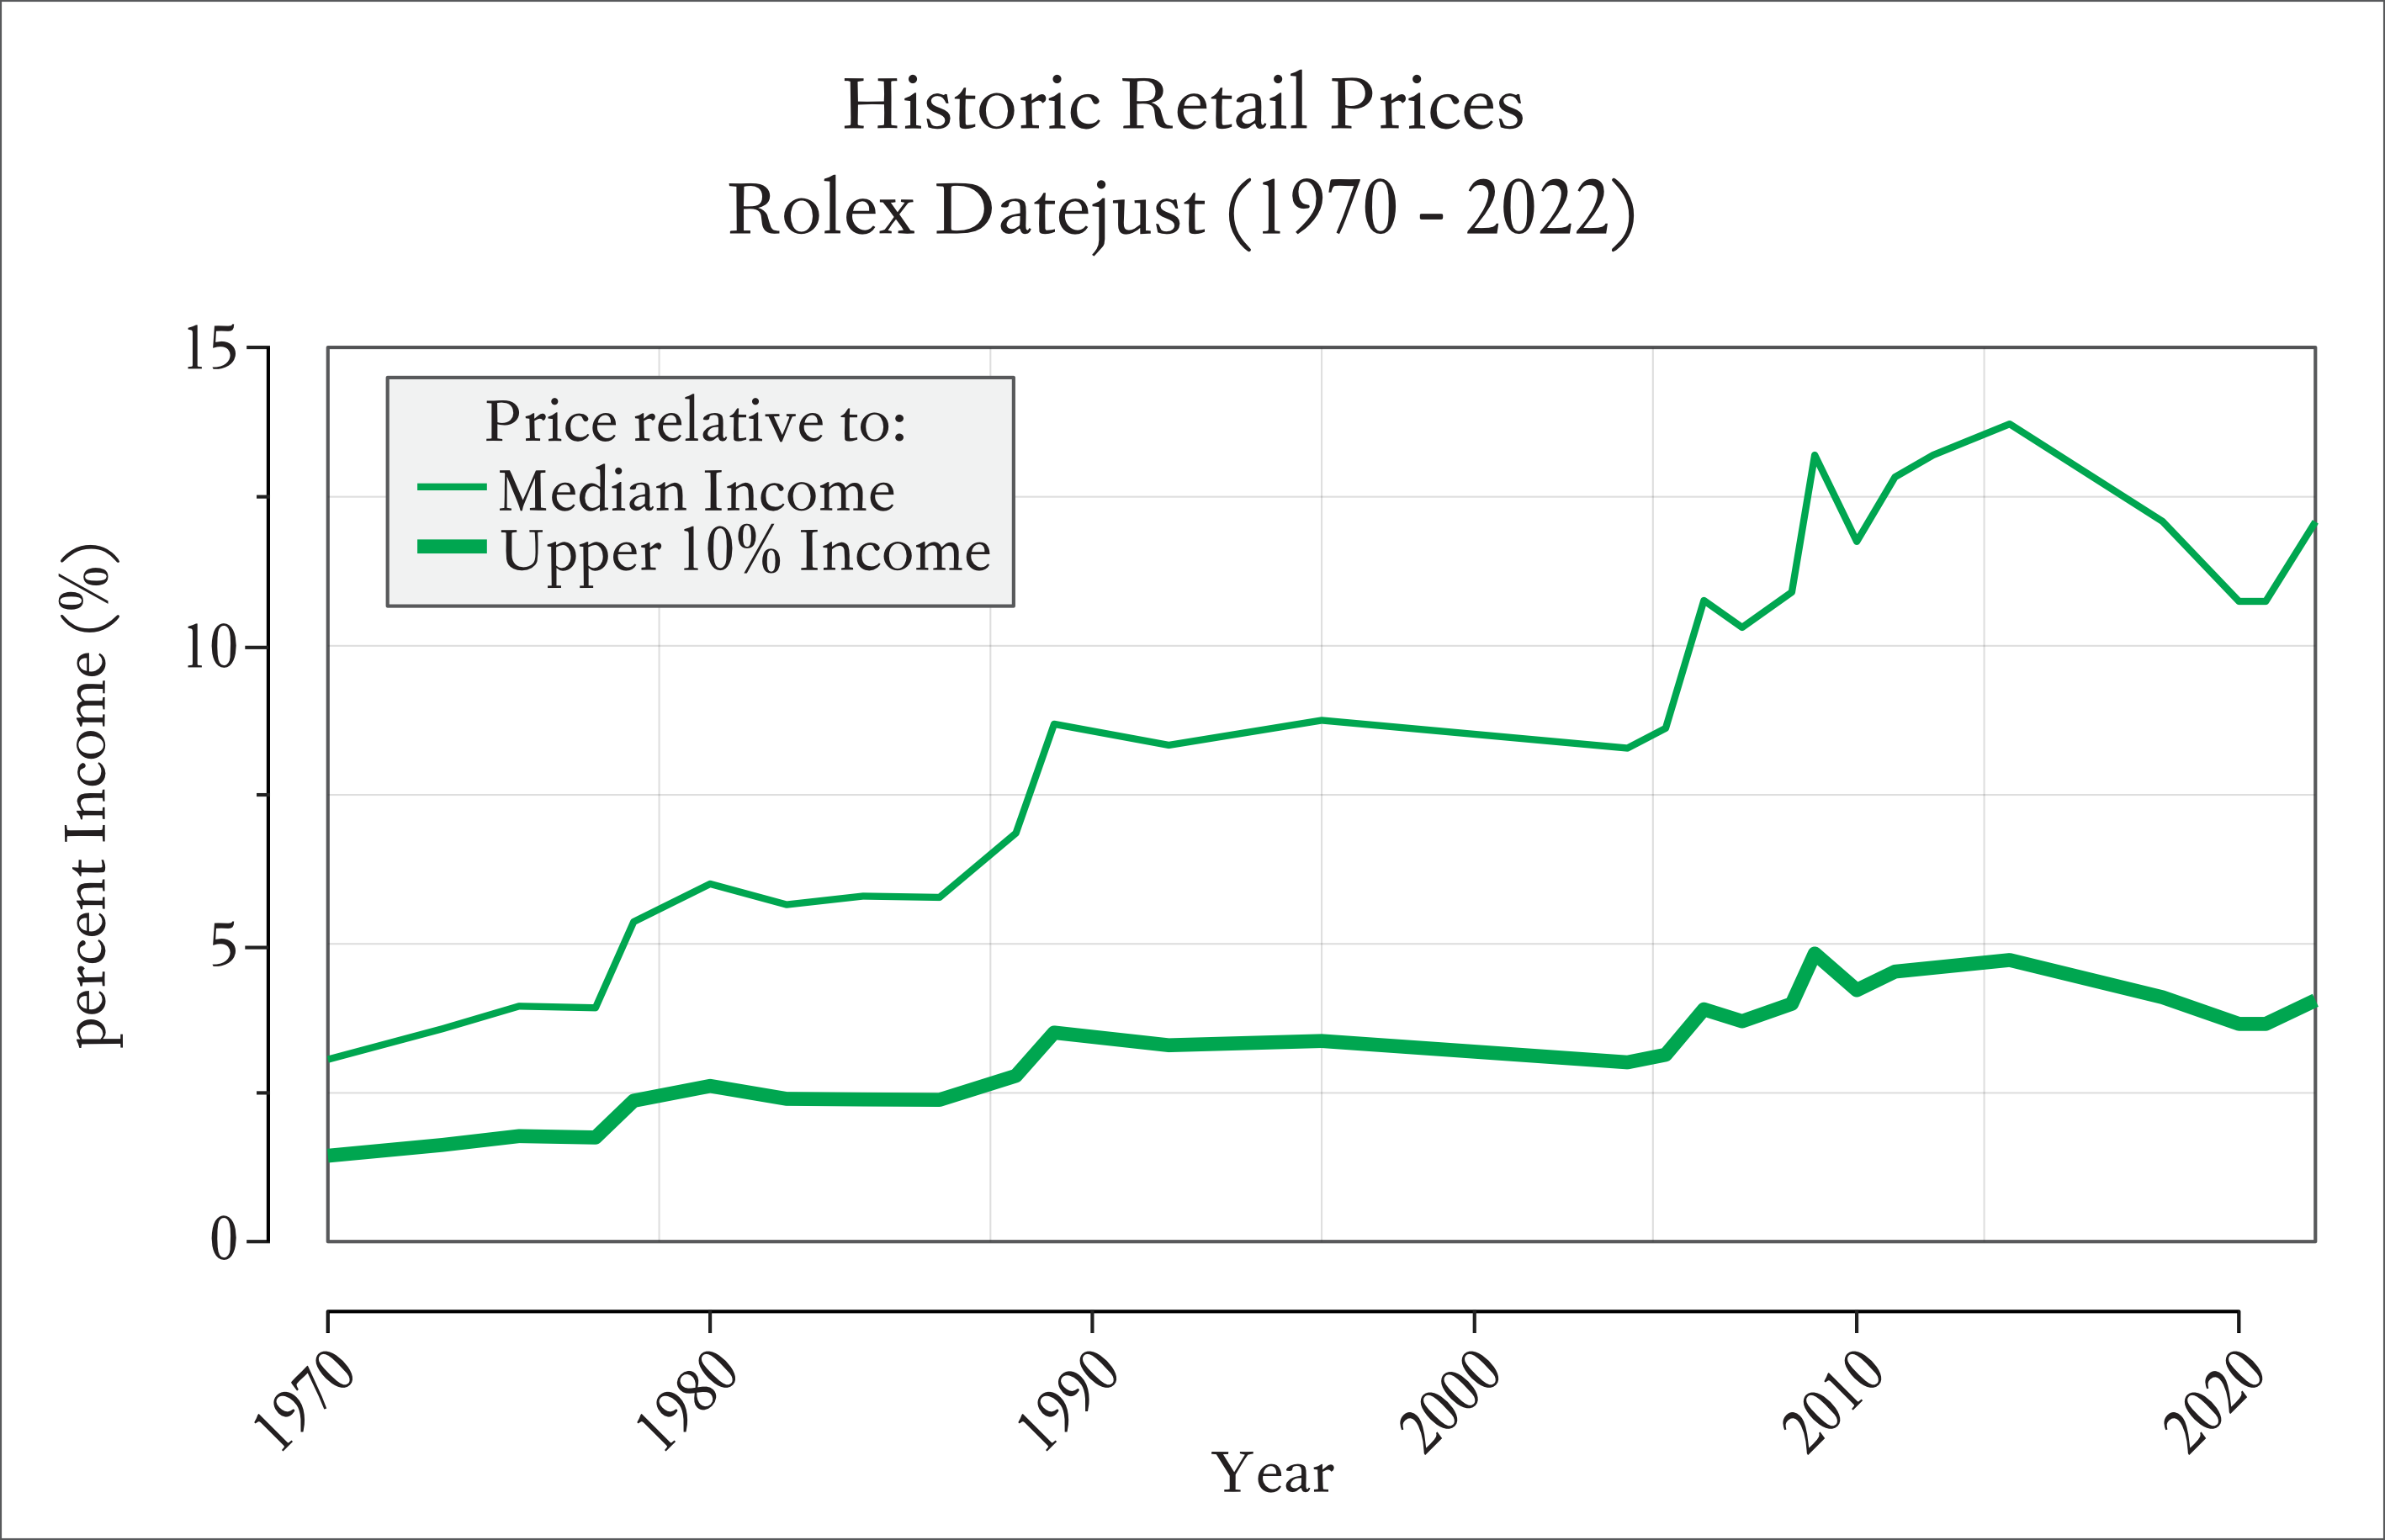 Historical Price Evolution of the Rolex Datejust relative to the Historical Annual Household Income